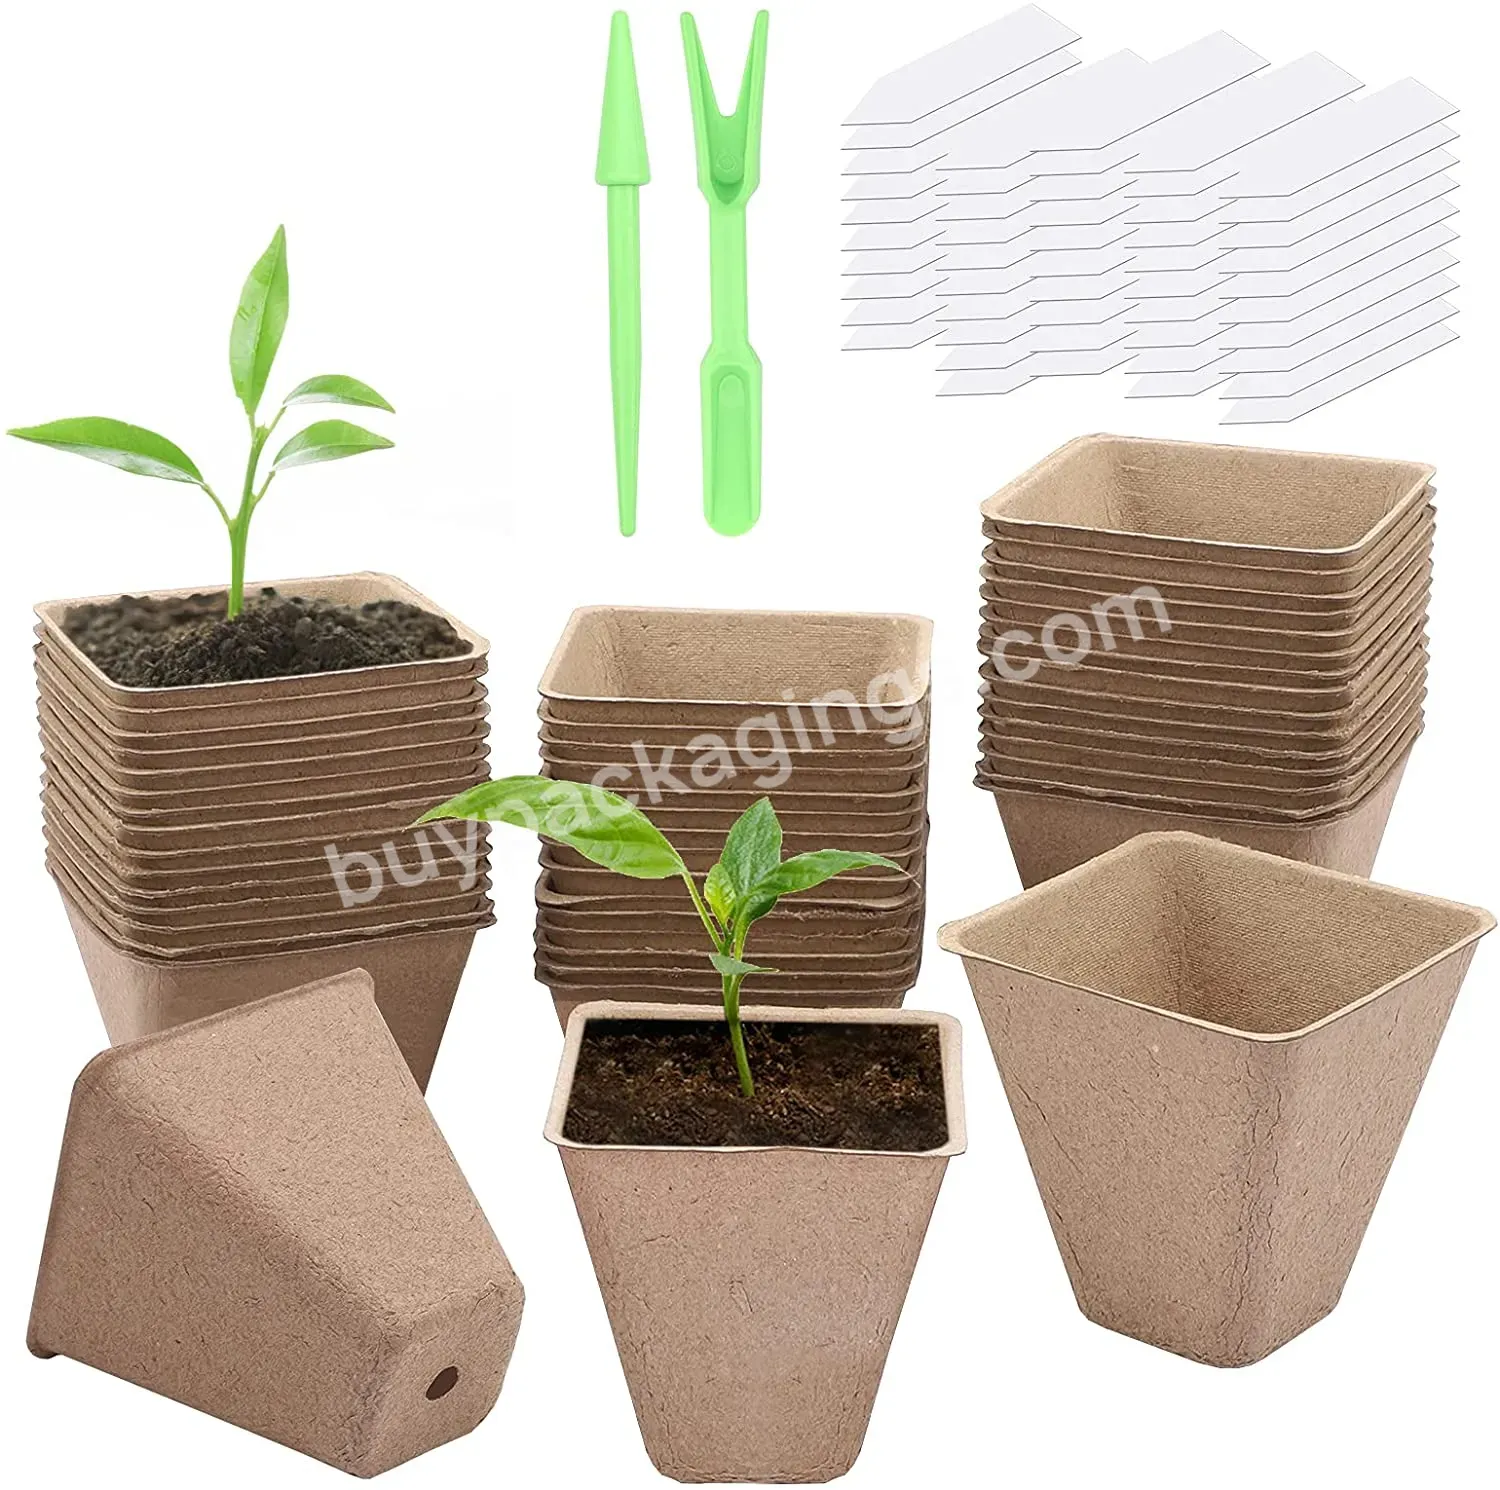 Seed Starter Peat Pots Kit Seed Starter Pots Square Seedling Tray With Holes For Garden Organic Biodegradable Seed Starter Tray - Buy Seeding Pot,Seed Starter,Paper Pot Tray.